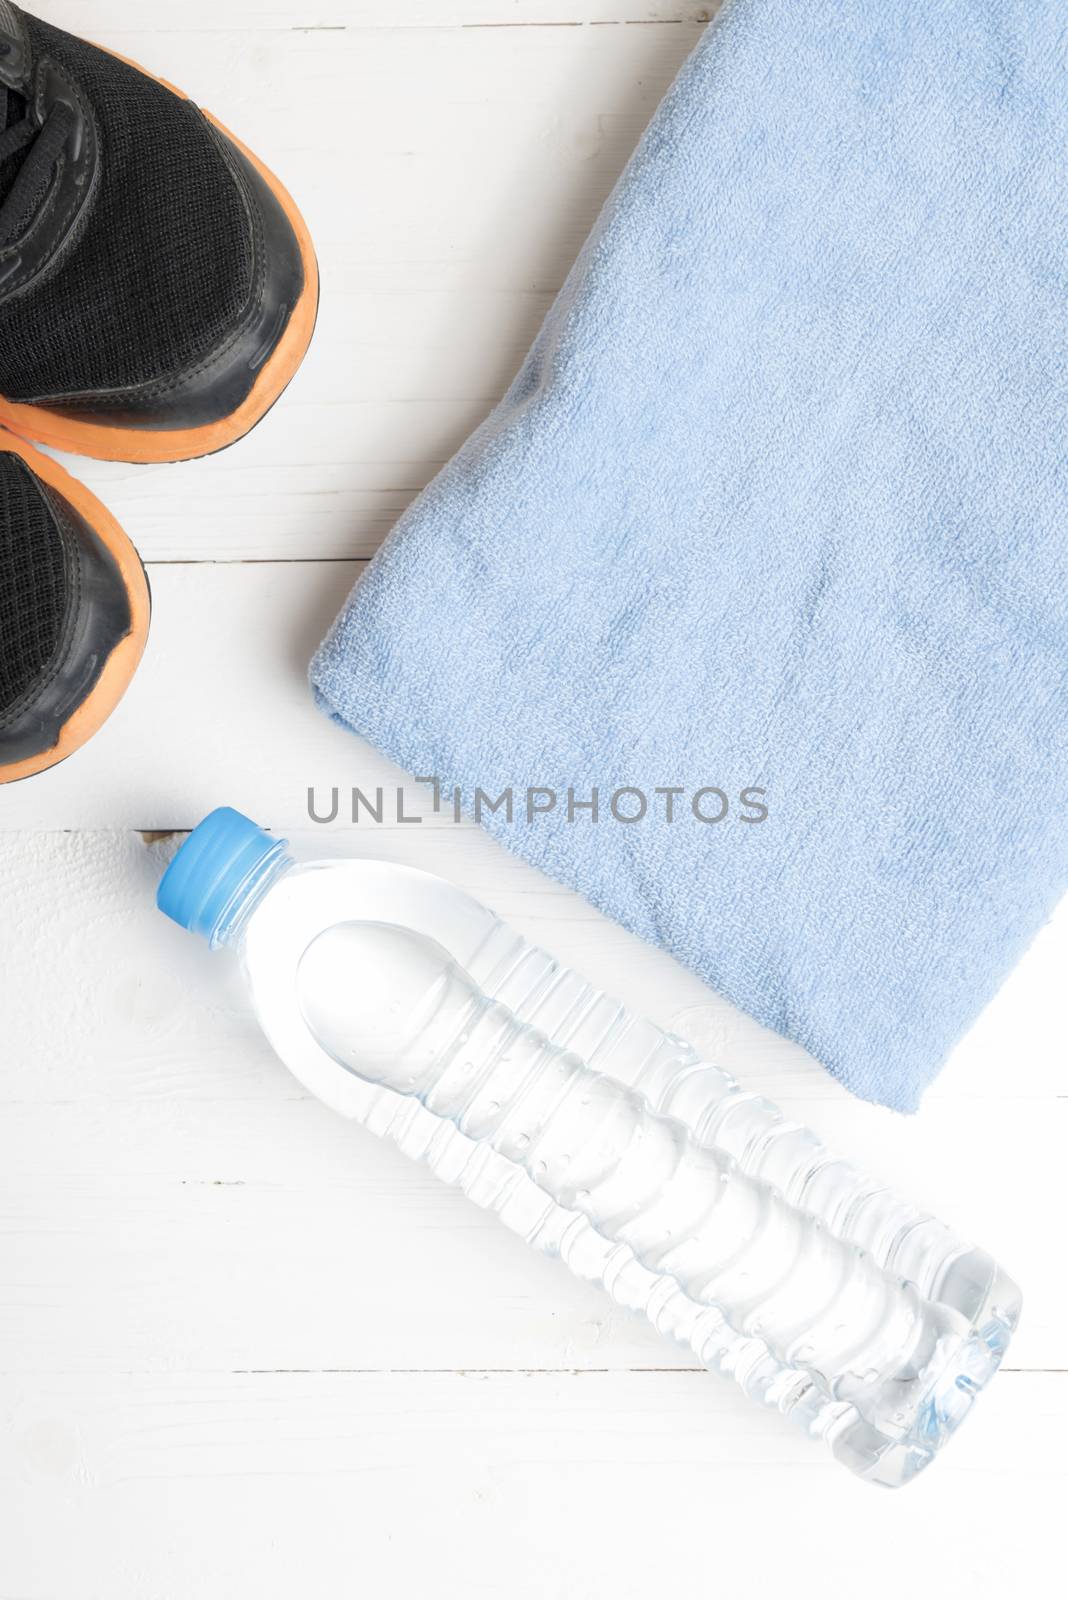 fitness equipment:blue towel,drinking water and running shoes on white wood table